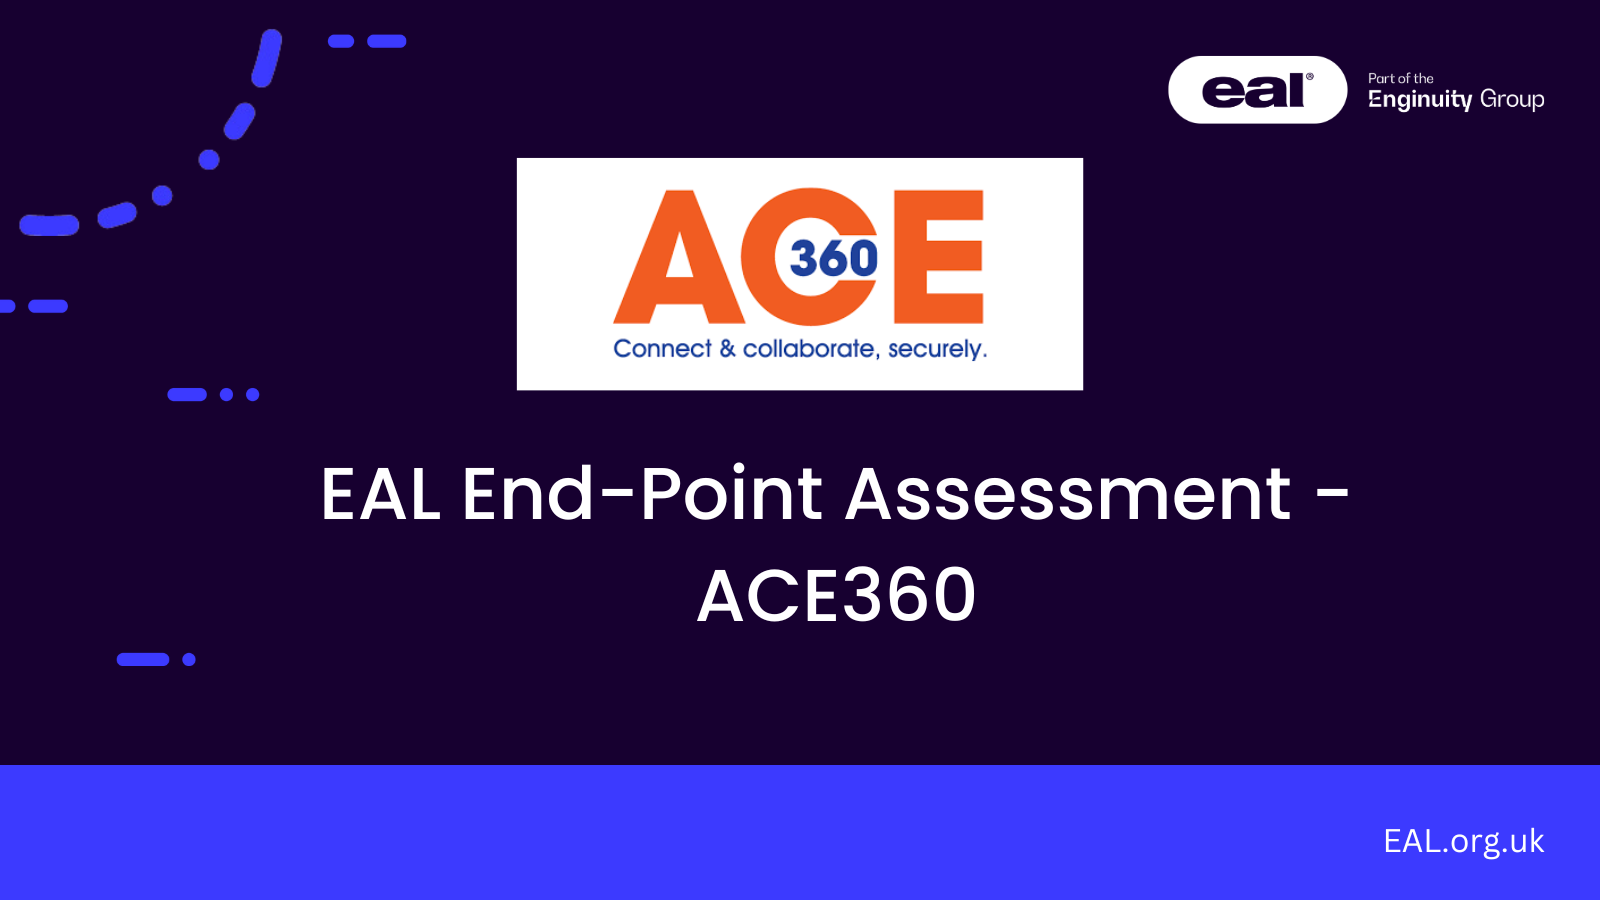 PowerPoint slide showing the Ace360 logo